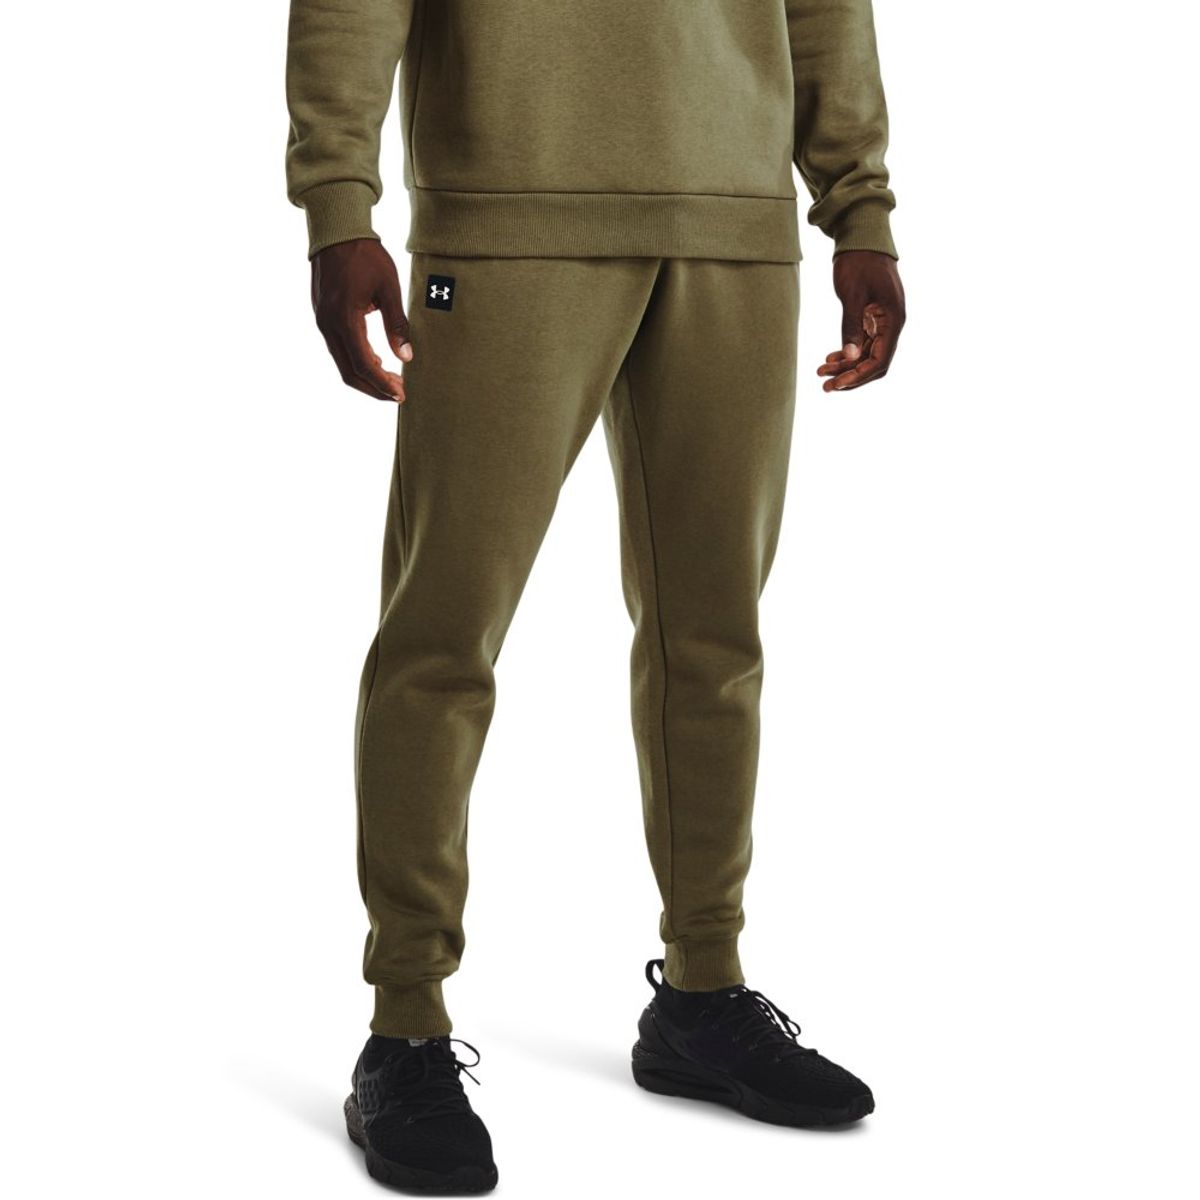 Under Armour Rival terry jogger in khaki